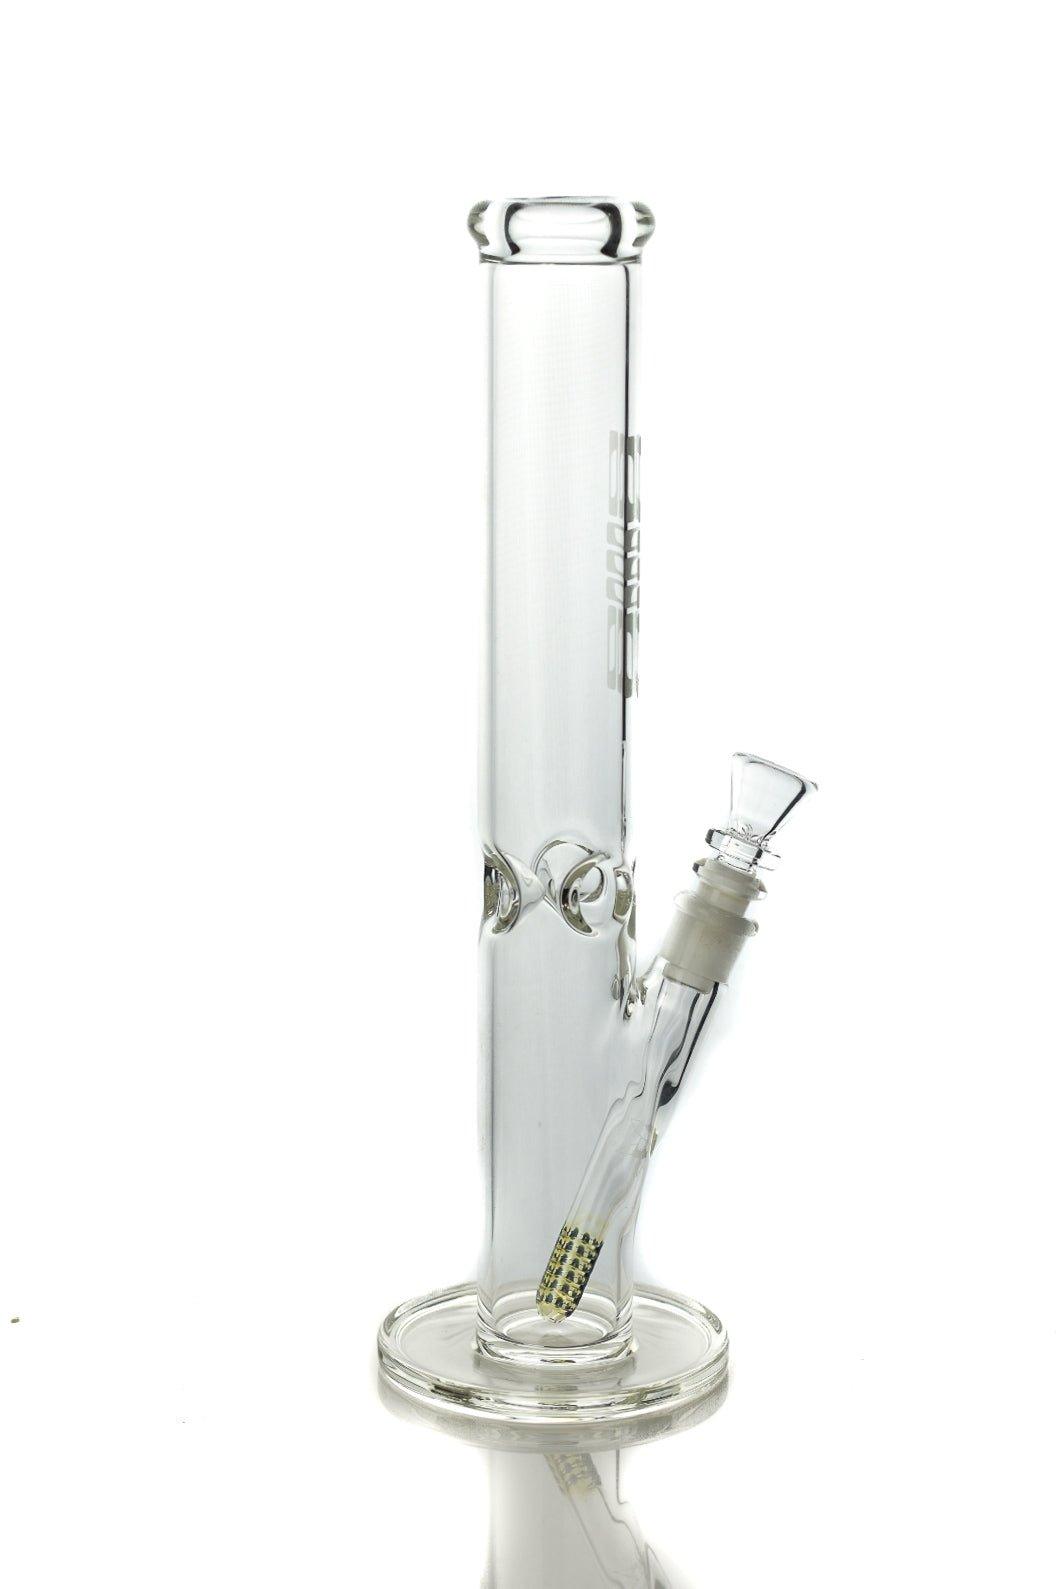 ILL Glass Straight 50 - Large 15" Honey colored Downstemp